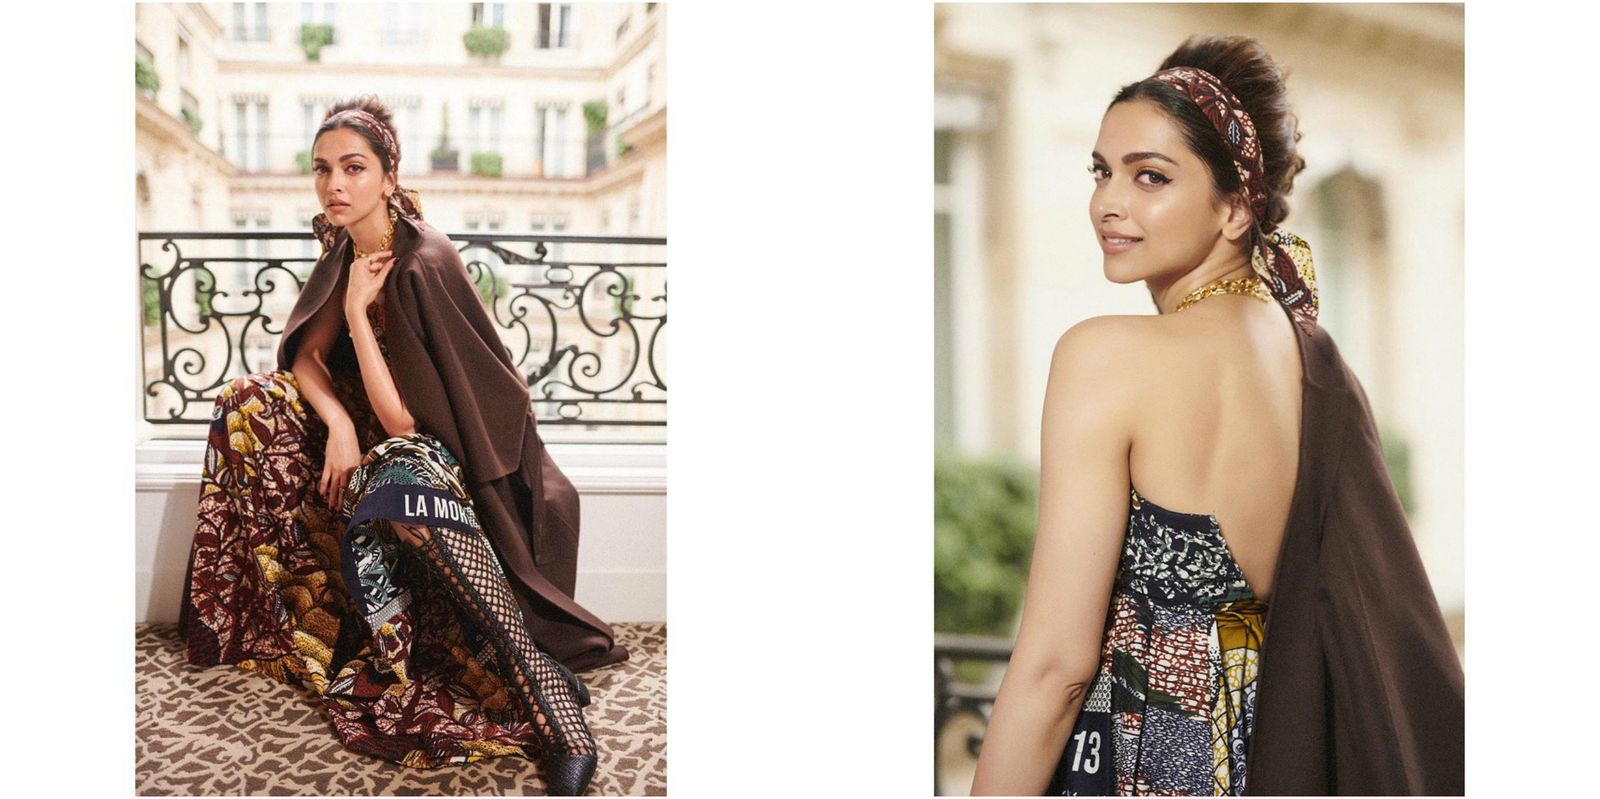 Deepika Padukone Attends The Prestigious Paris Fashion Week For Dior In A Look That Has Vintage Charm Written All Over It